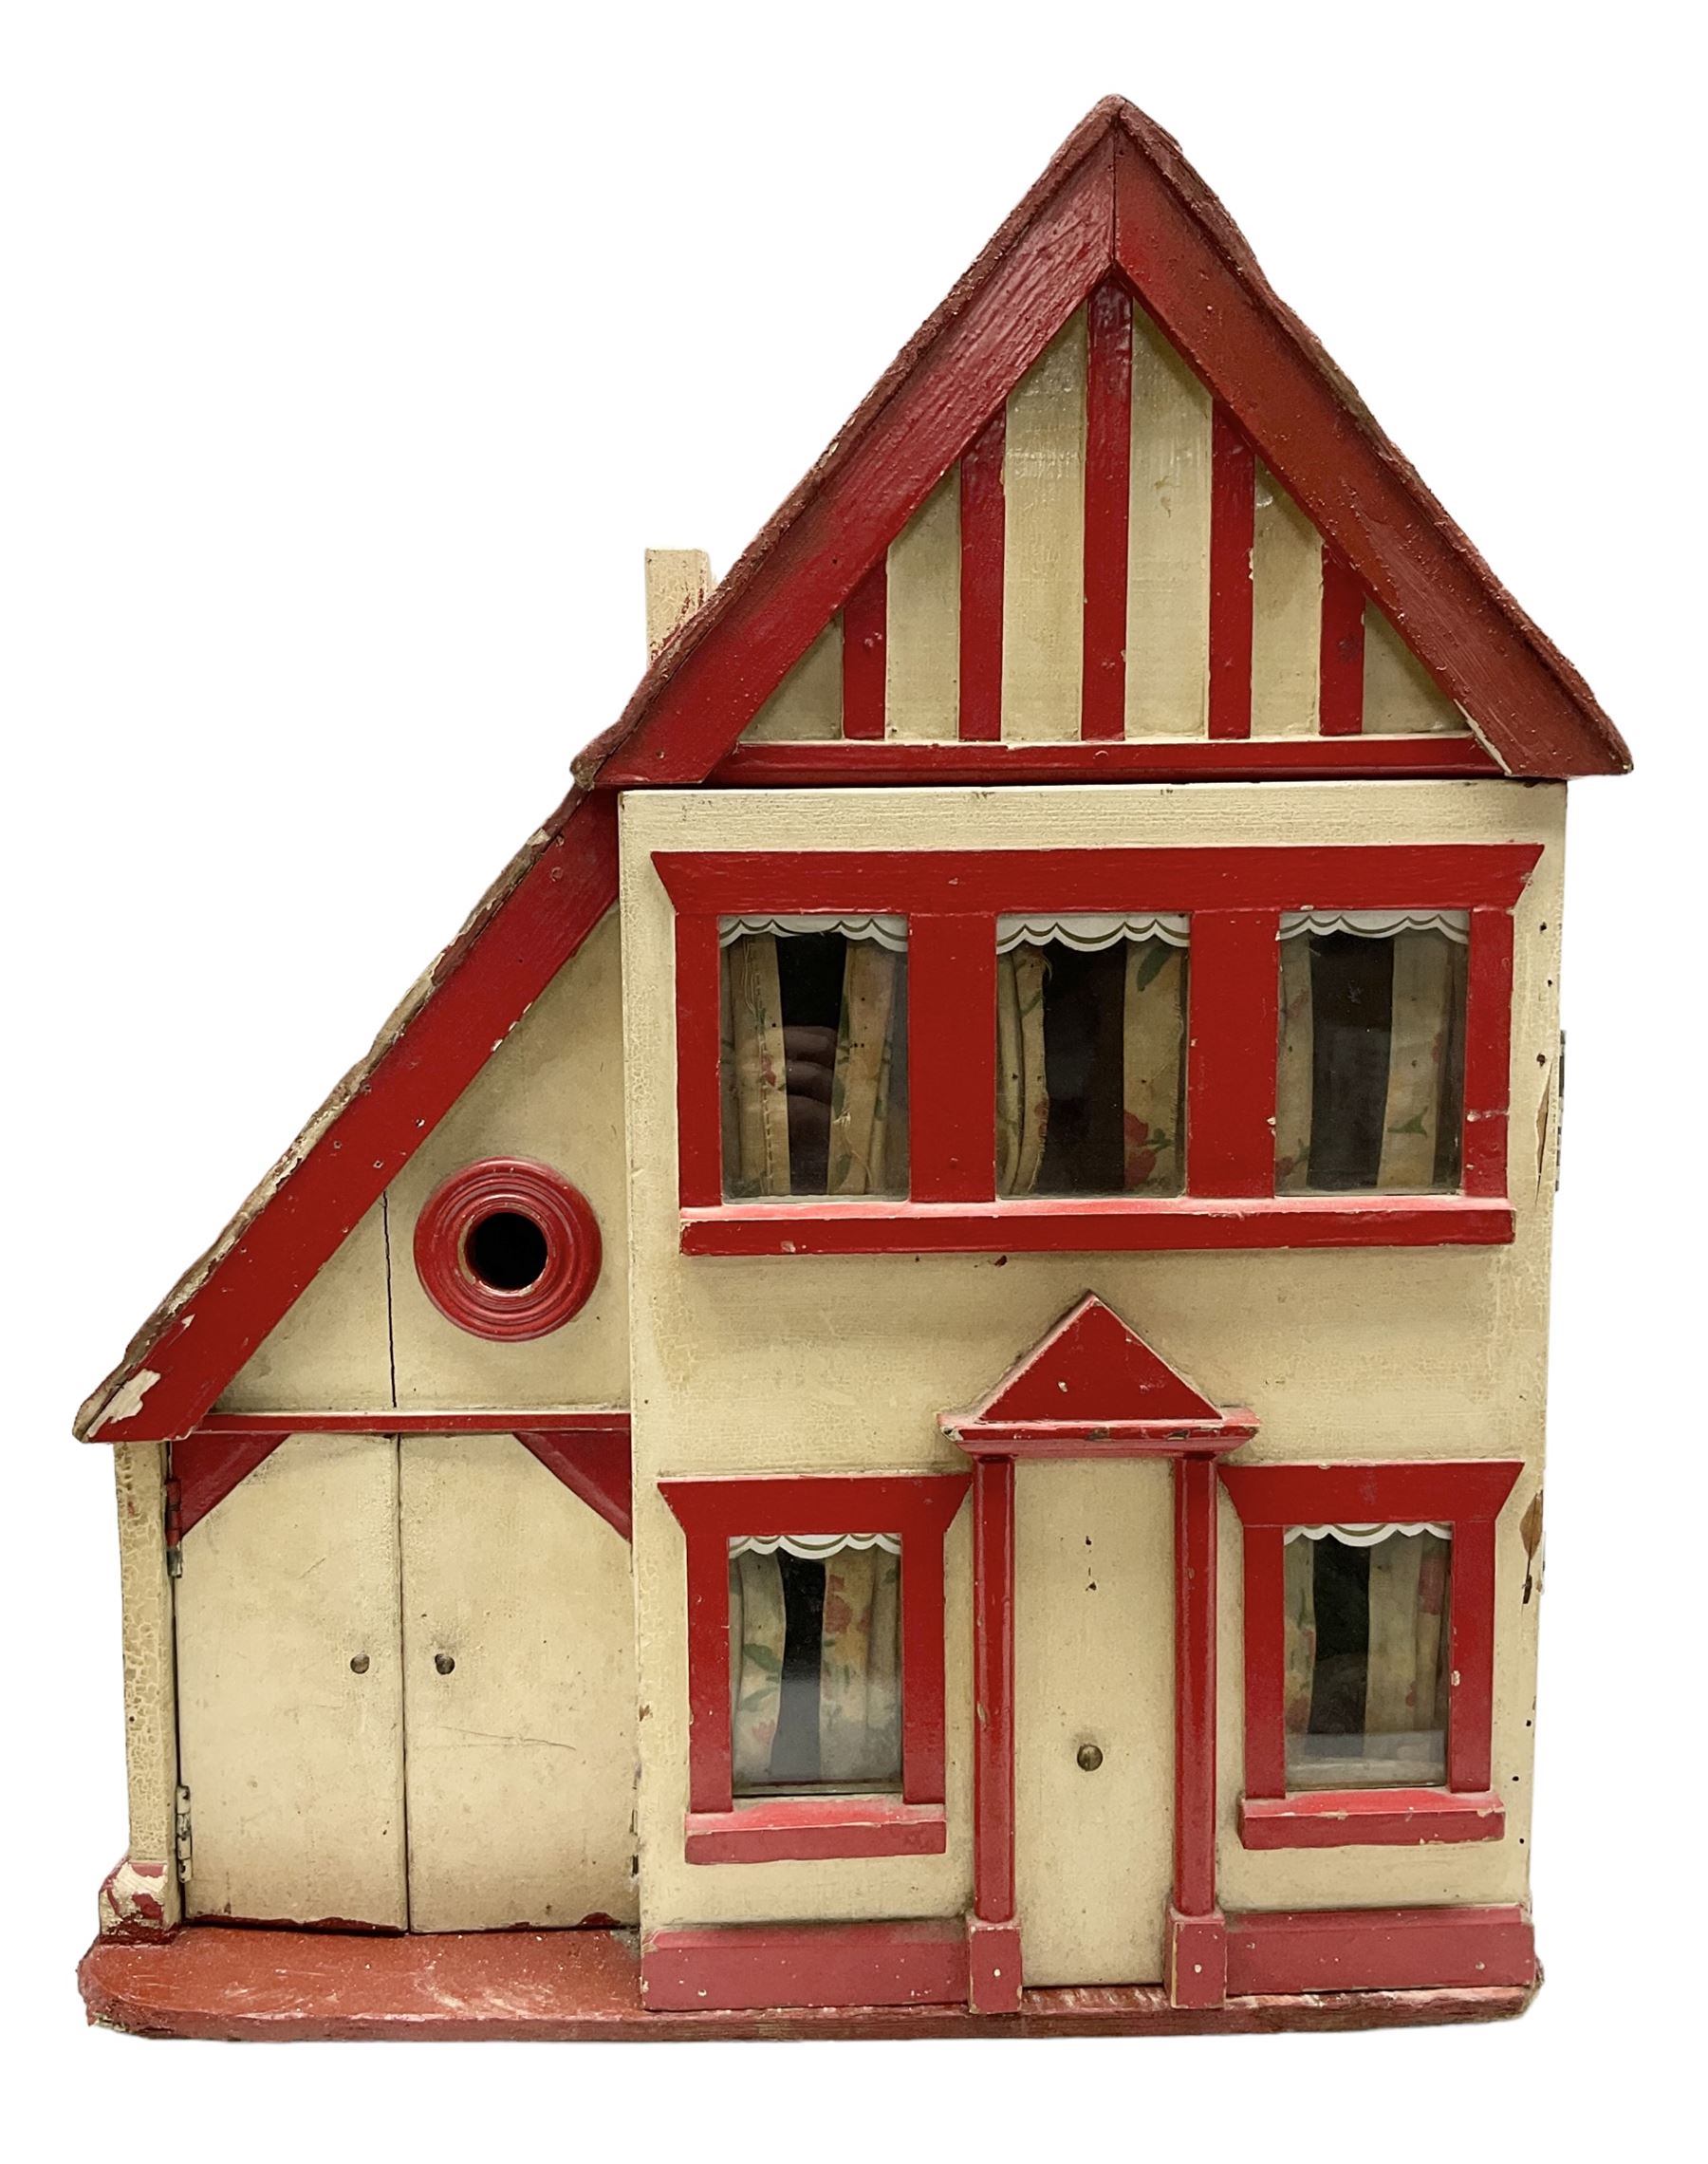 1960s scratch-built wooden doll's house as a red and white painted two-storey house with half-timber